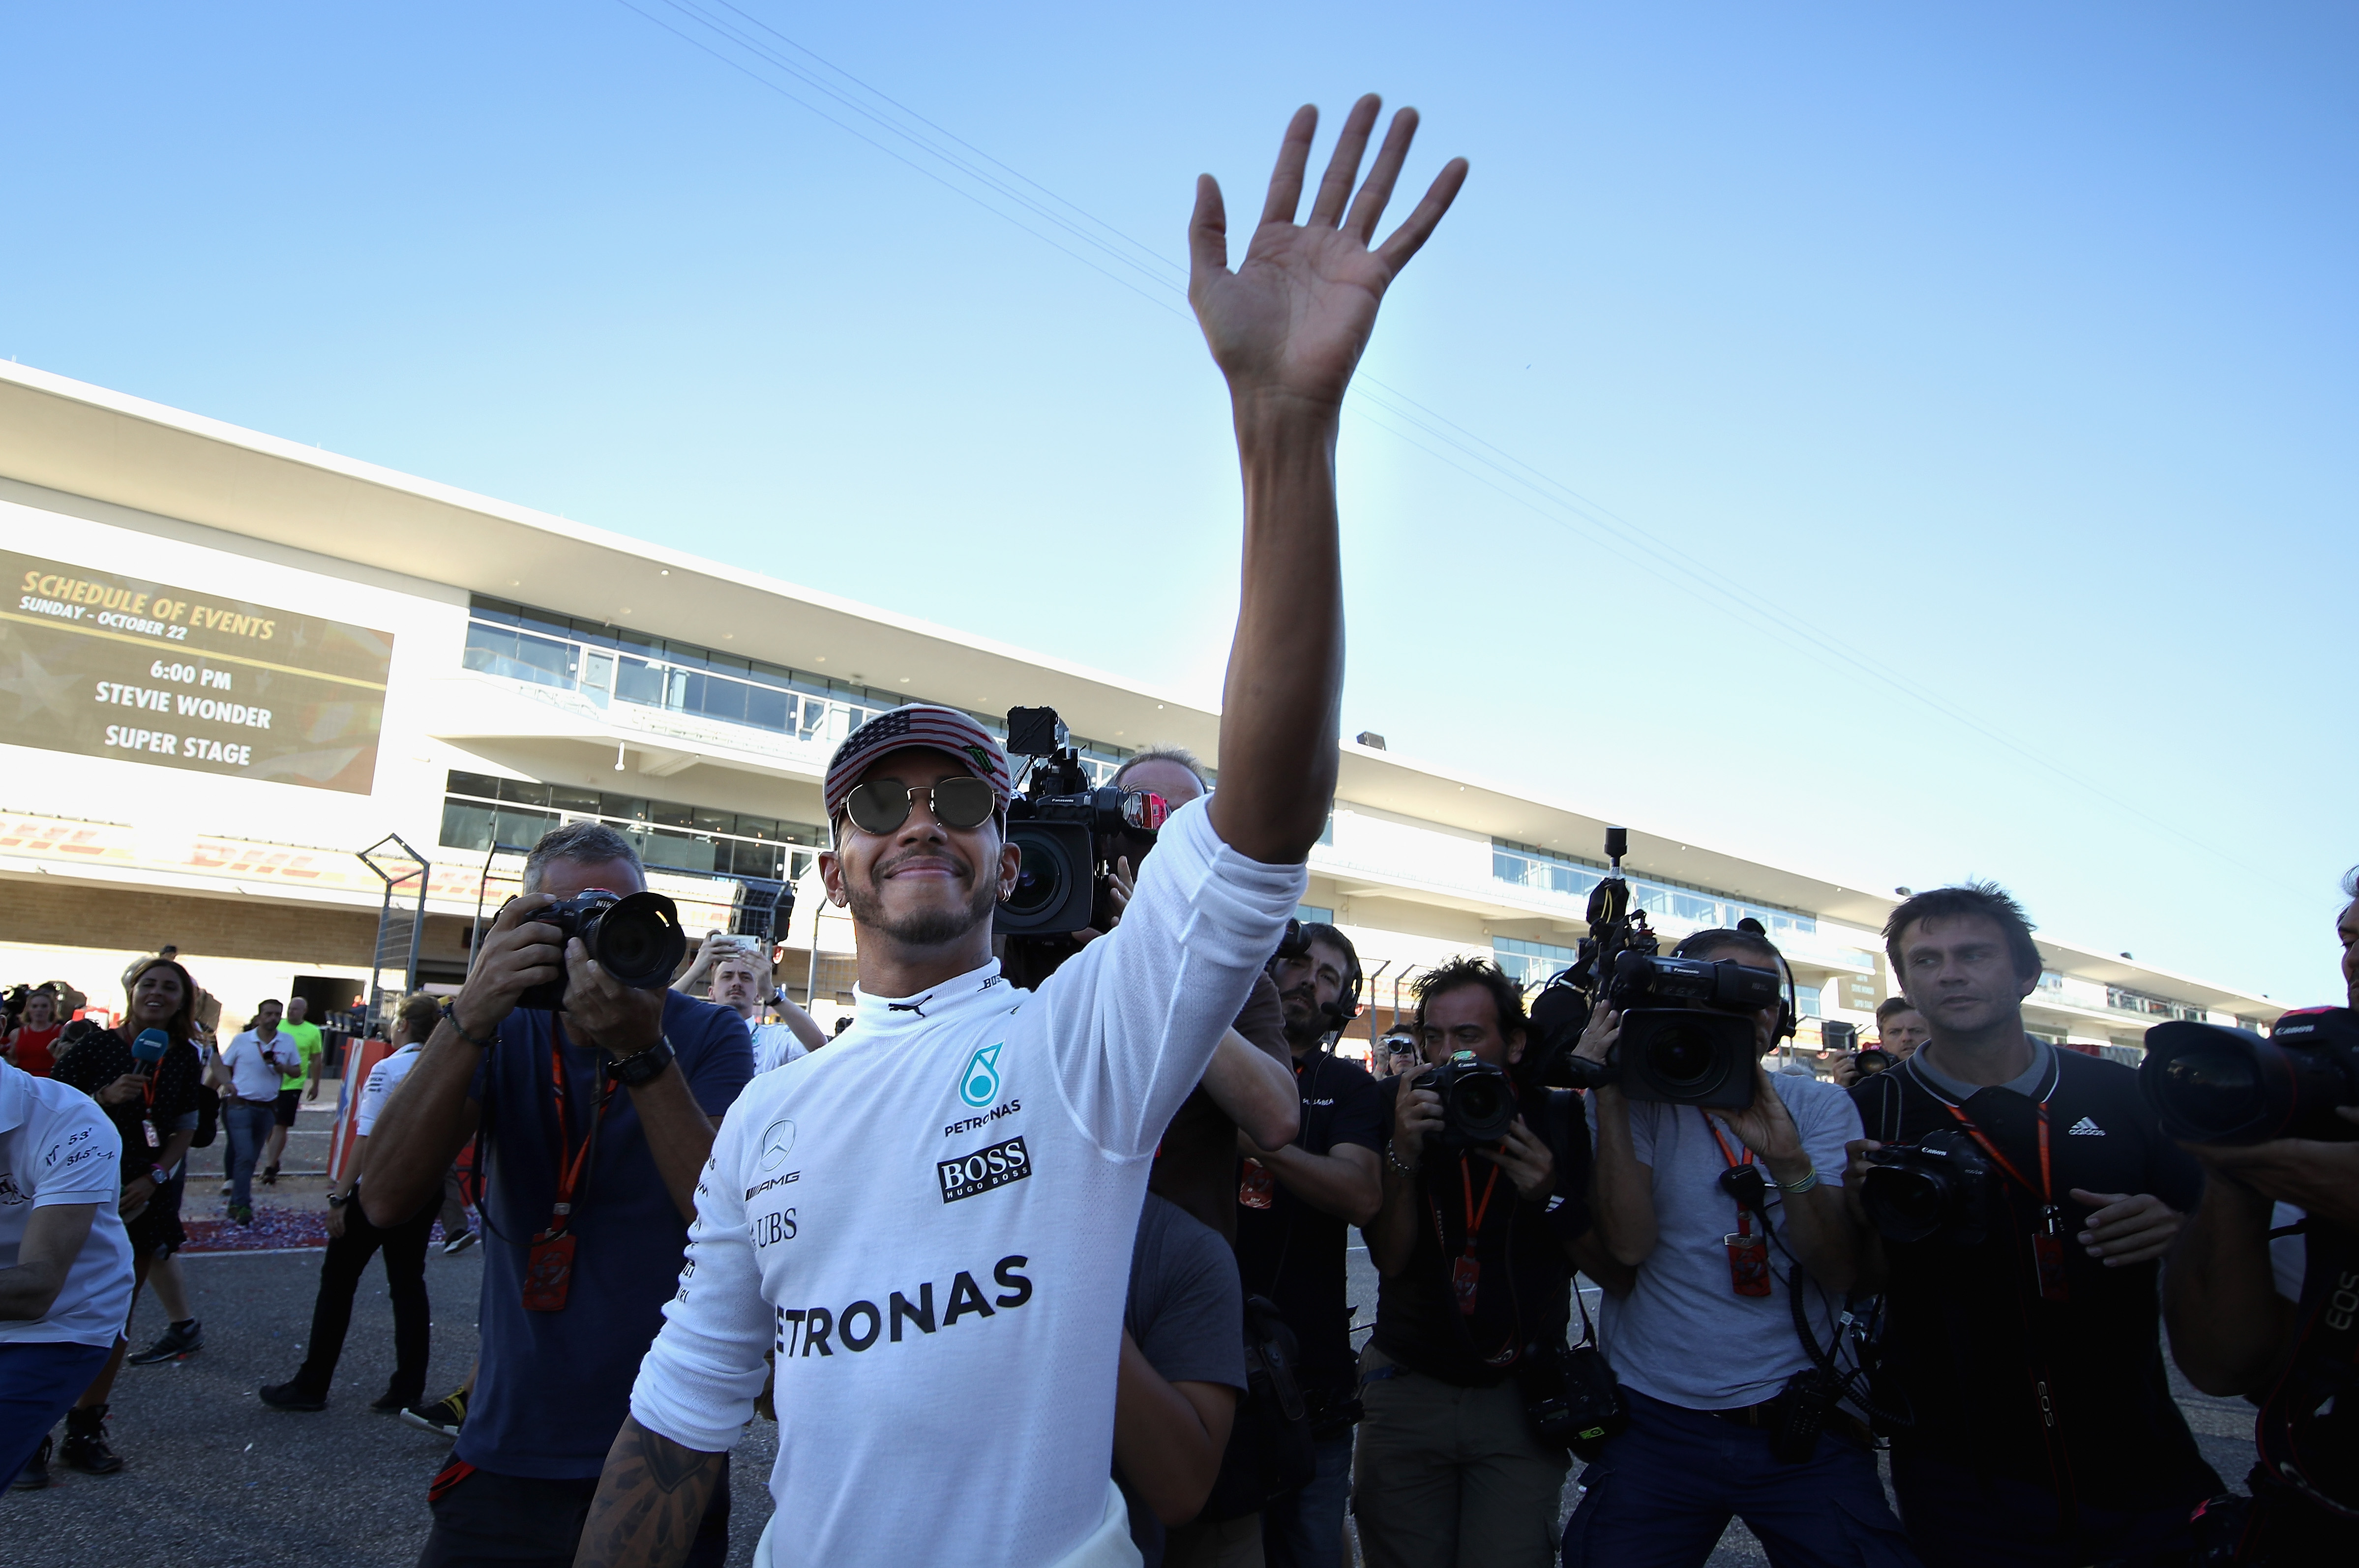 Lewis Hamilton could wrap up the F1 title this weekend.